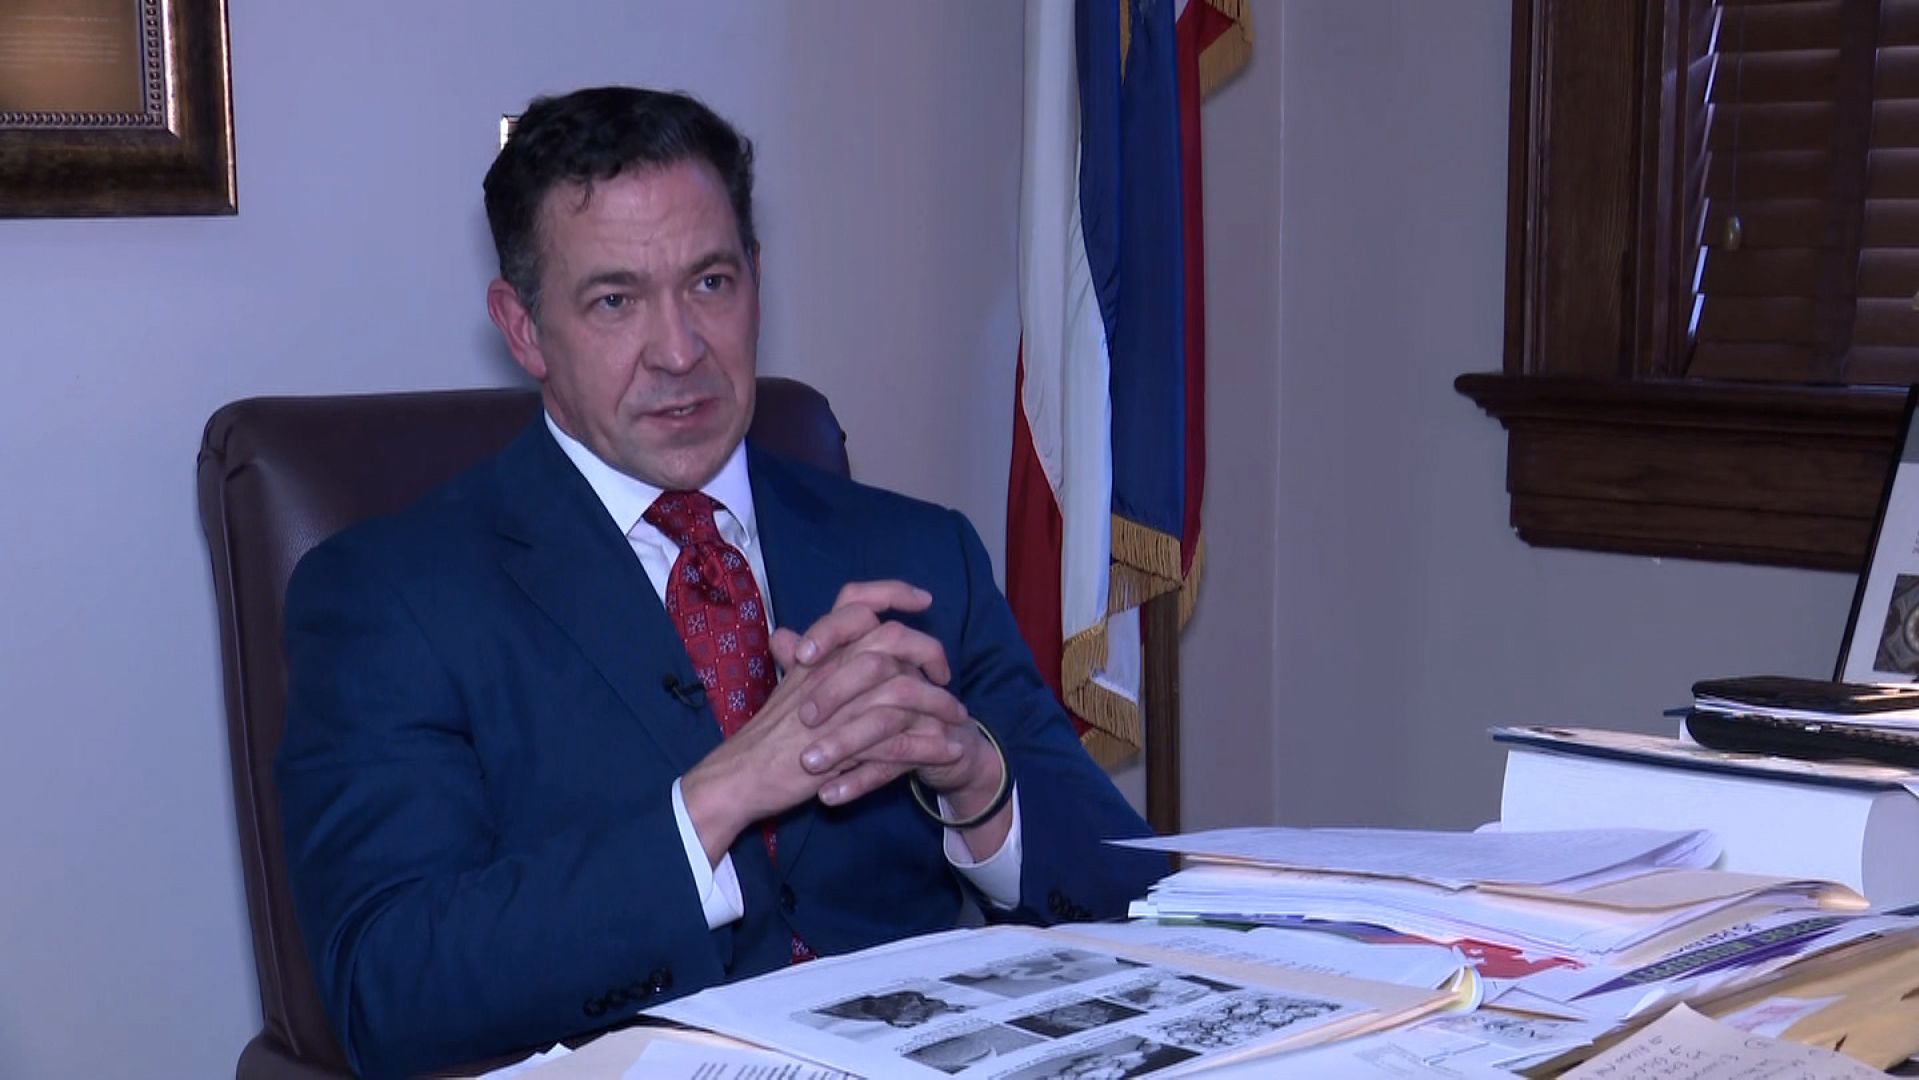 State Sen. Chris McDaniel said critical race theory promotes "victimhood" instead of student success.